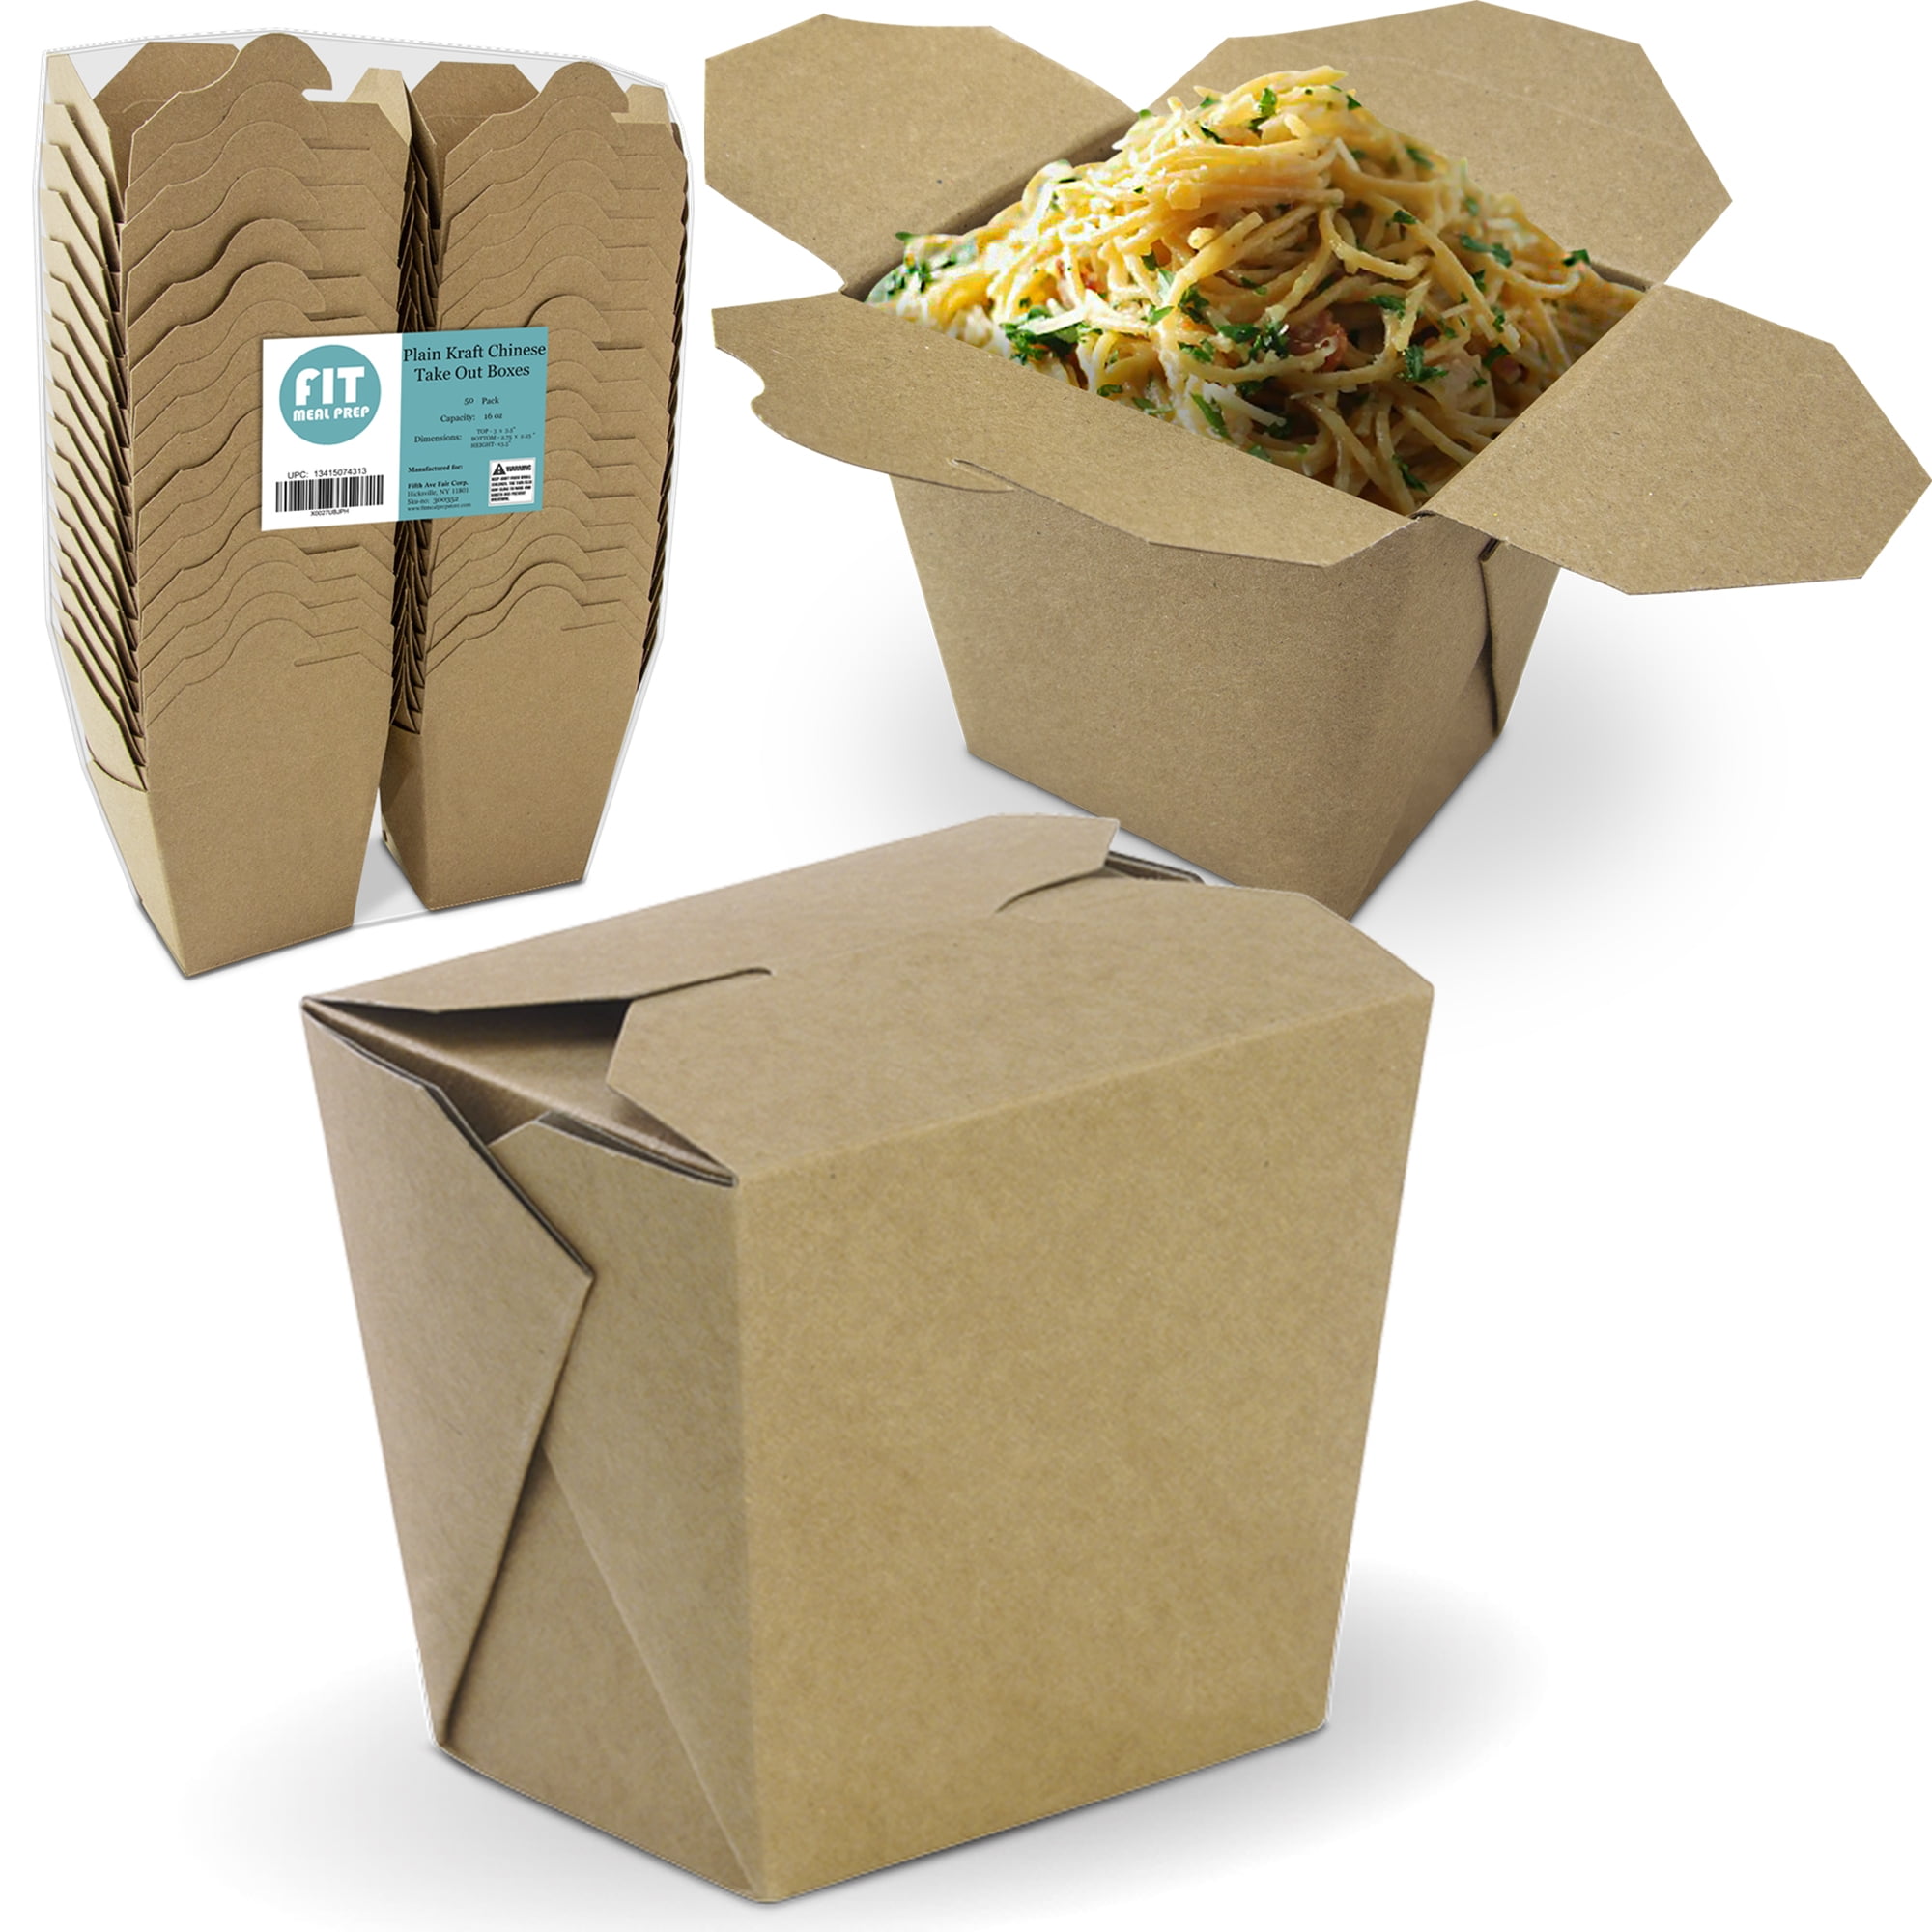 50] 16 Oz & [50] Mini 8 Oz Brown Chinese Takeout Box Combo Pack by Avant  Grub